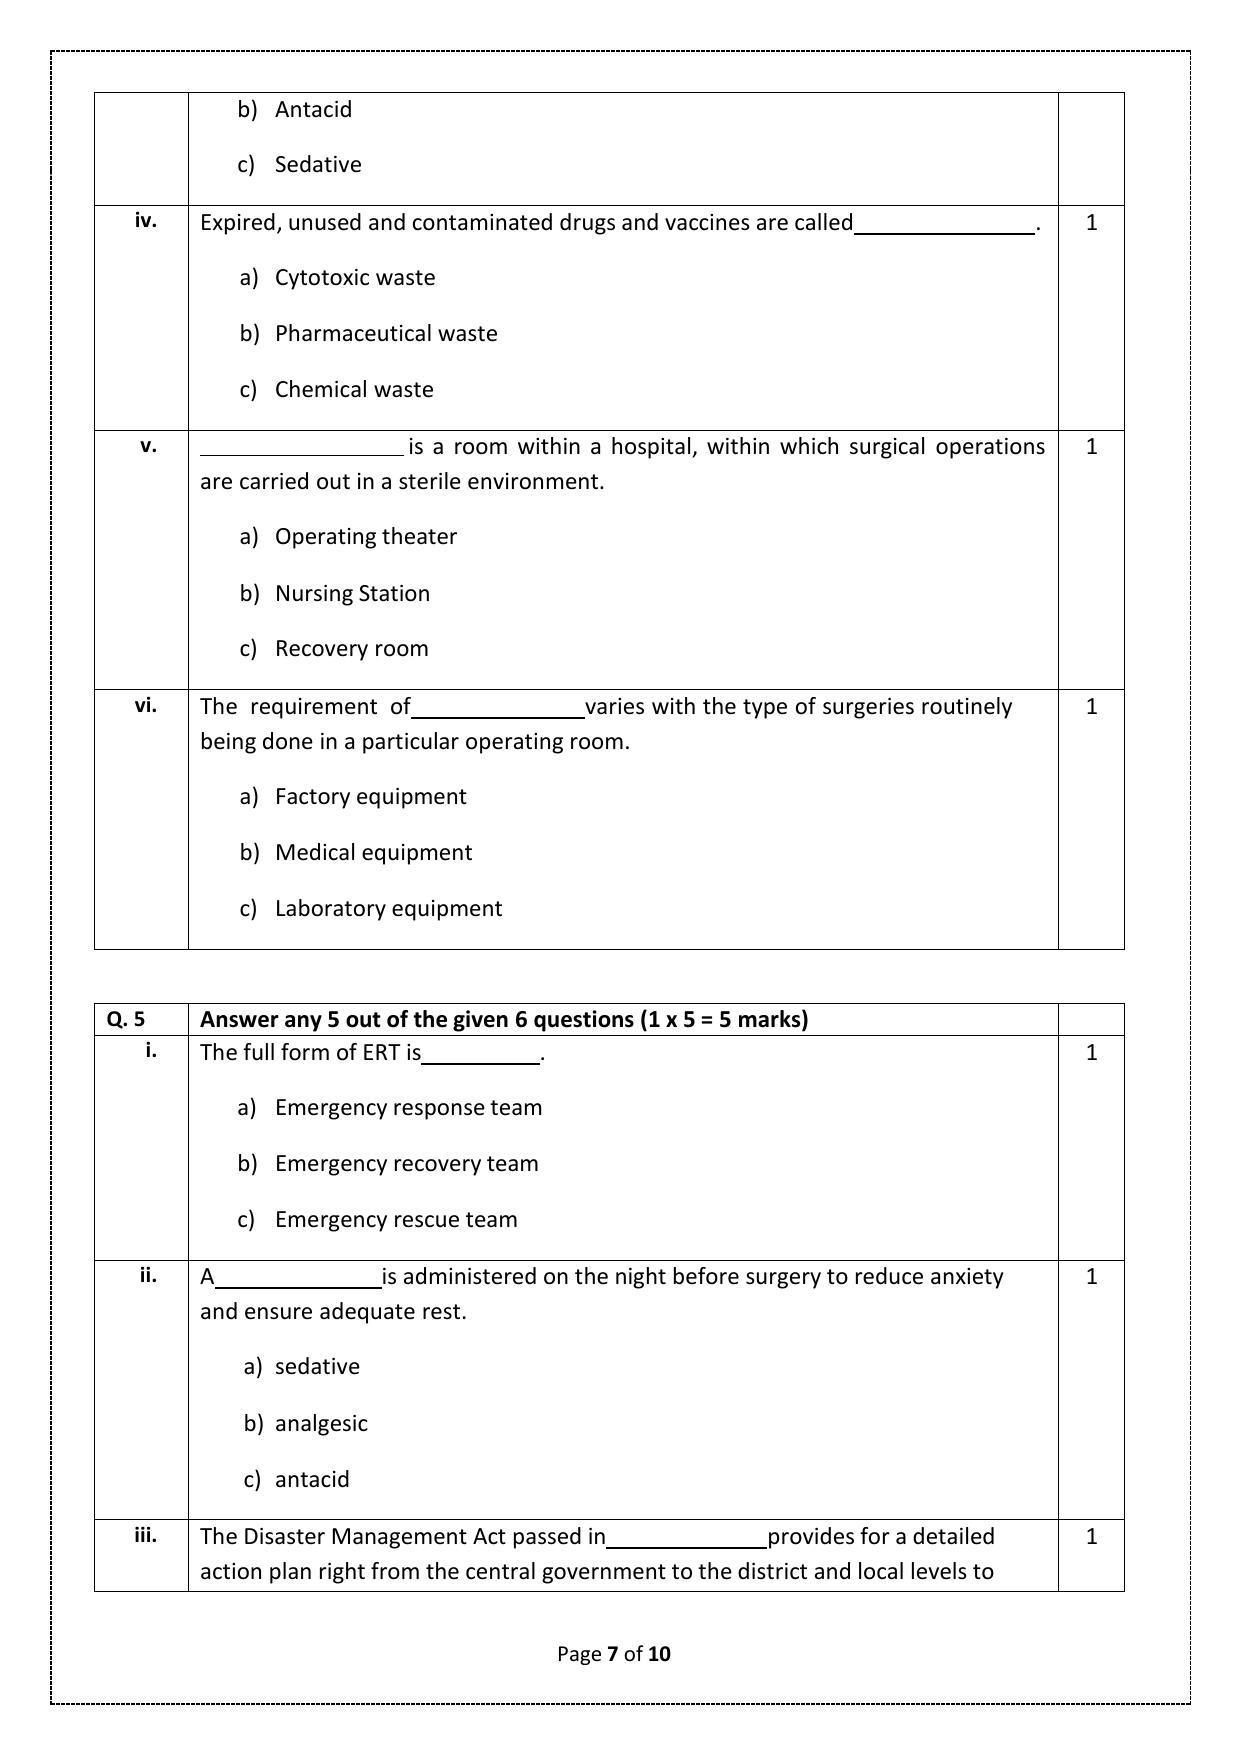 CBSE Class 12 Health Care (Skill Education) Sample Papers 2023 - Page 7